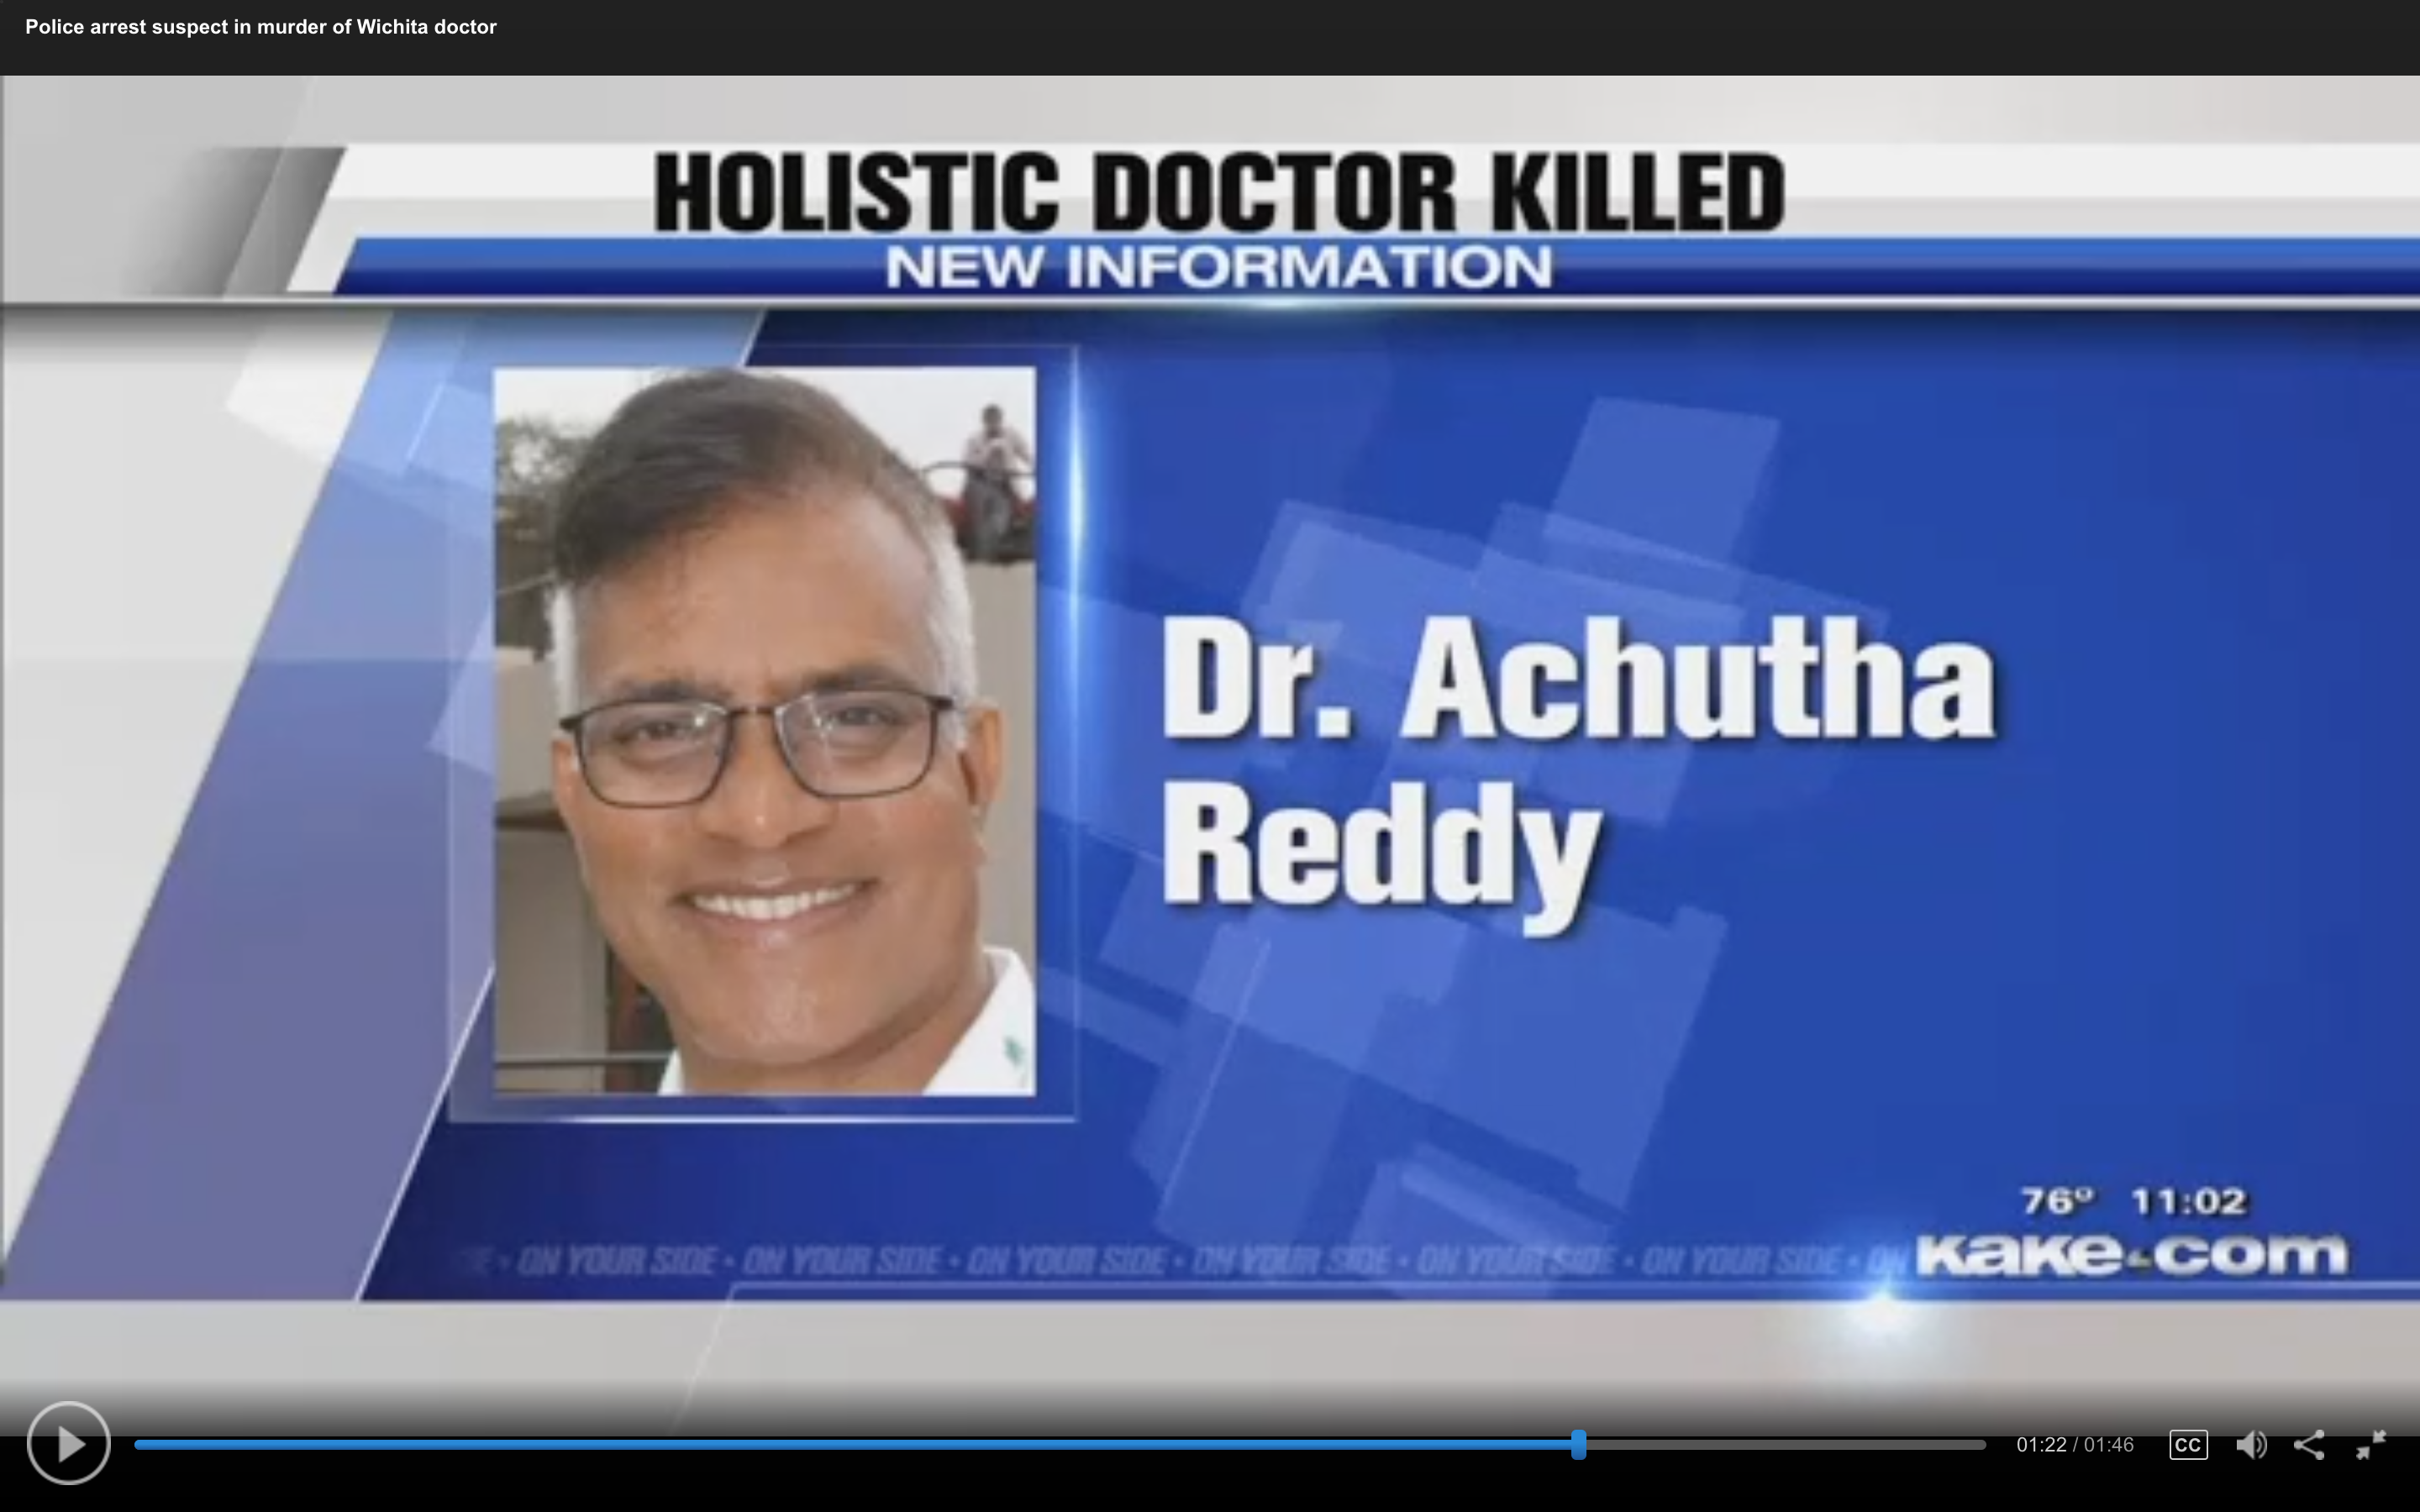 Holistic Psychiatrist Stabbed to Death at “Holistic Psychiatric Services” Clinic